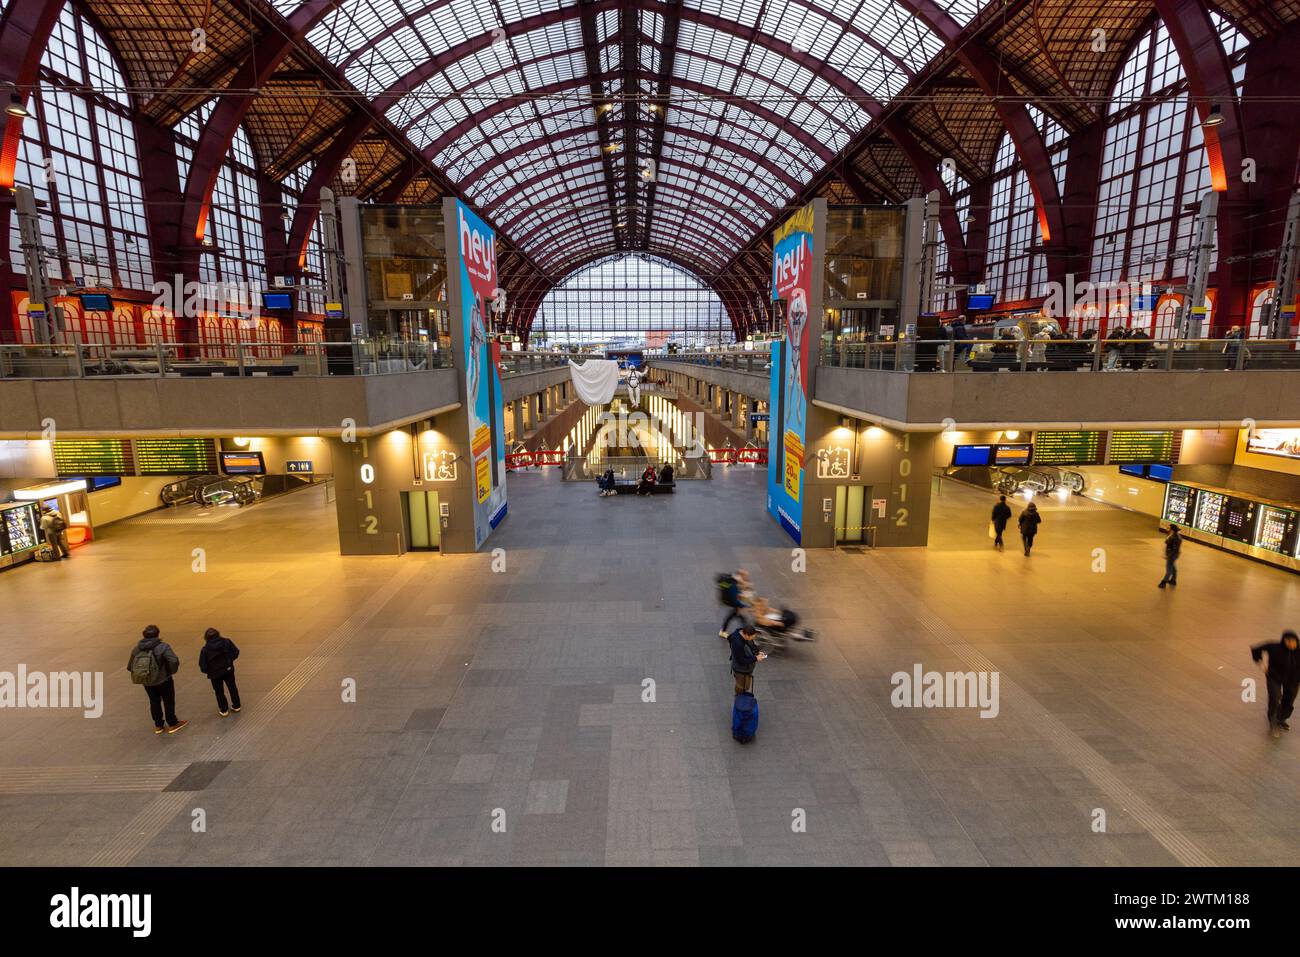 Antwerp, Belgium, January 25th, 2024, This photograph offers a view of the expansive interior of Antwerp Central Station, capturing the grandeur of its arched red ceiling and the spaciousness of its main concourse. Passengers appear scattered throughout, some in motion and others standing still, against the backdrop of shops and information displays. The station's design, which seamlessly integrates historic architecture with modern functionality, serves as a central hub for travelers from around the world. Expansive Interior of Antwerp Central Station. High quality photo Stock Photo